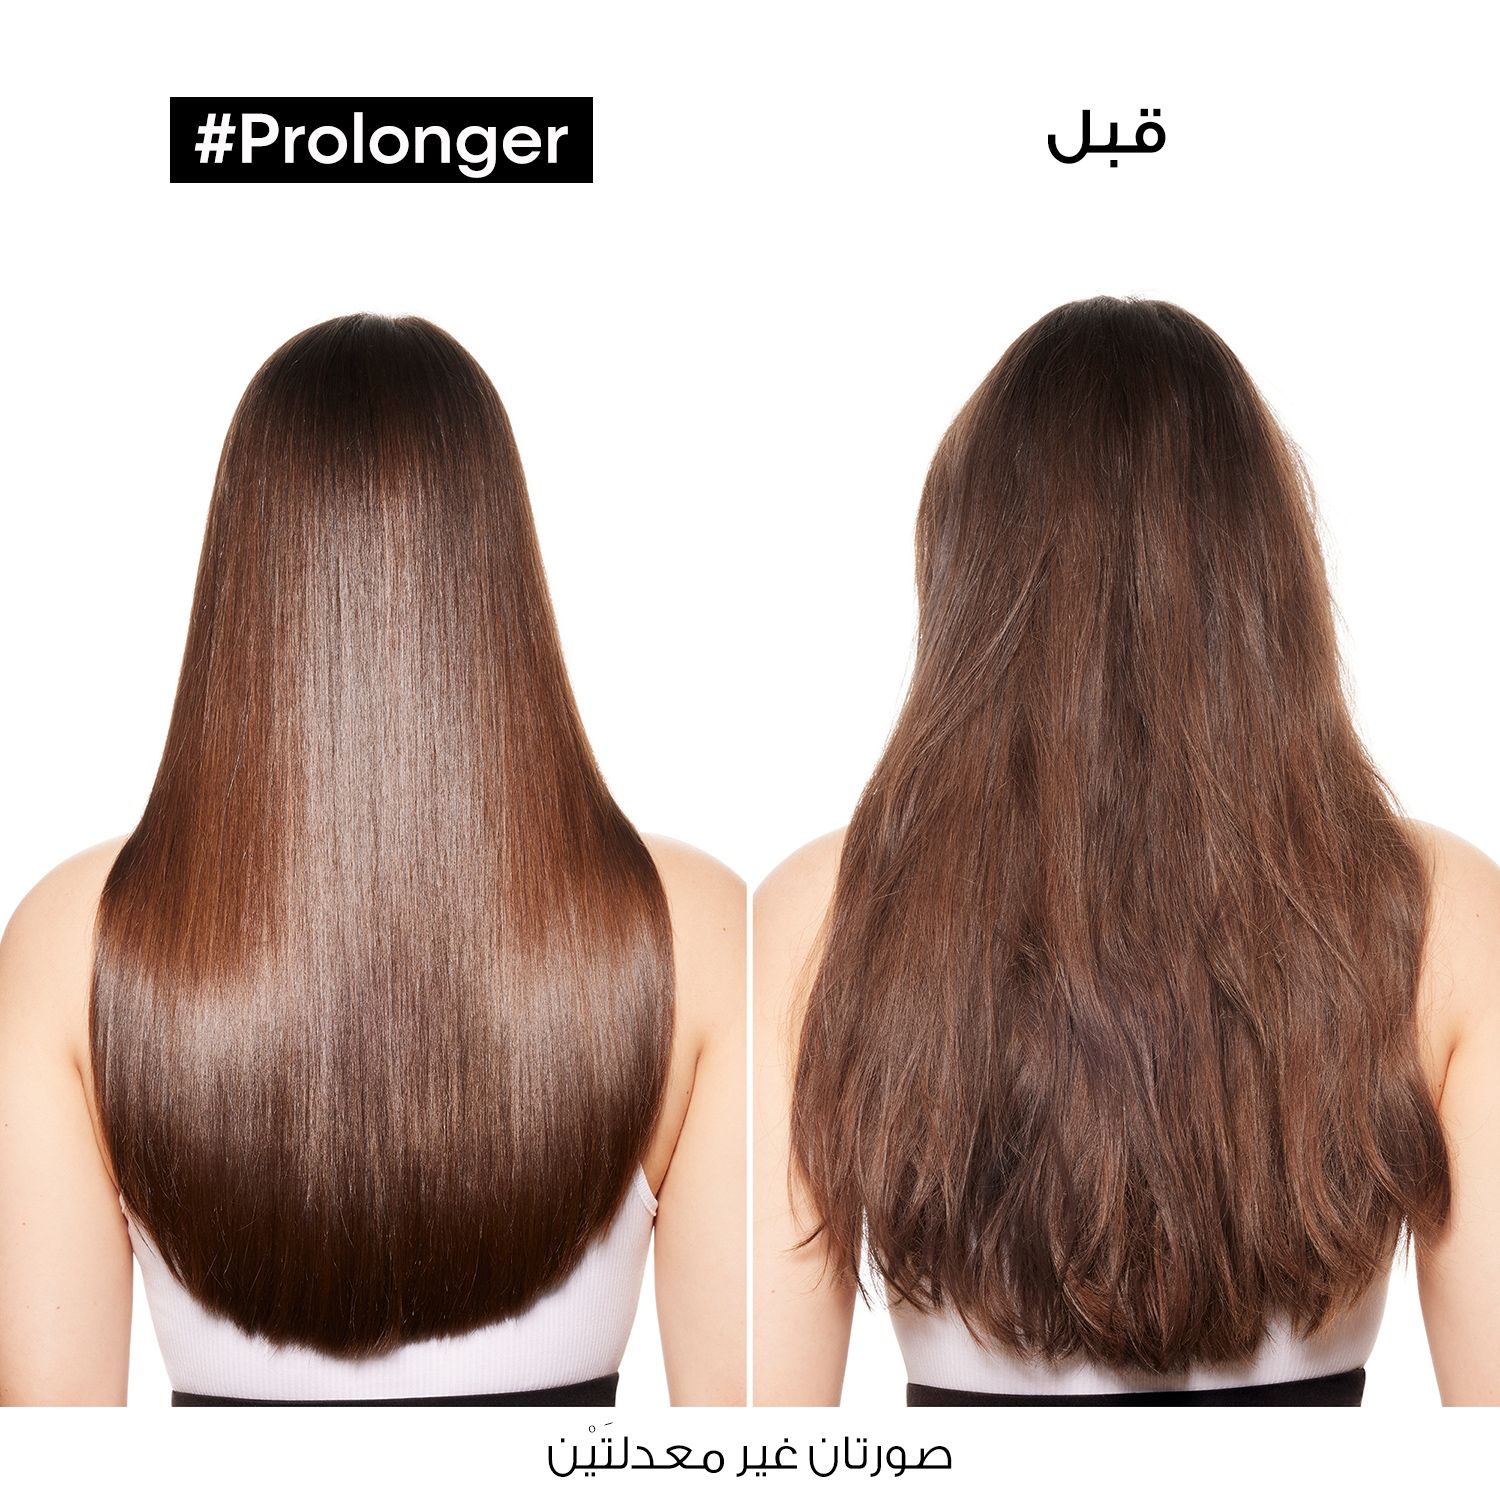 L’Oréal Professionnel Pro Longer shampoo With Filler-A100 and Amino Acid for long hair with thinned ends SERIE EXPERT 300 ml